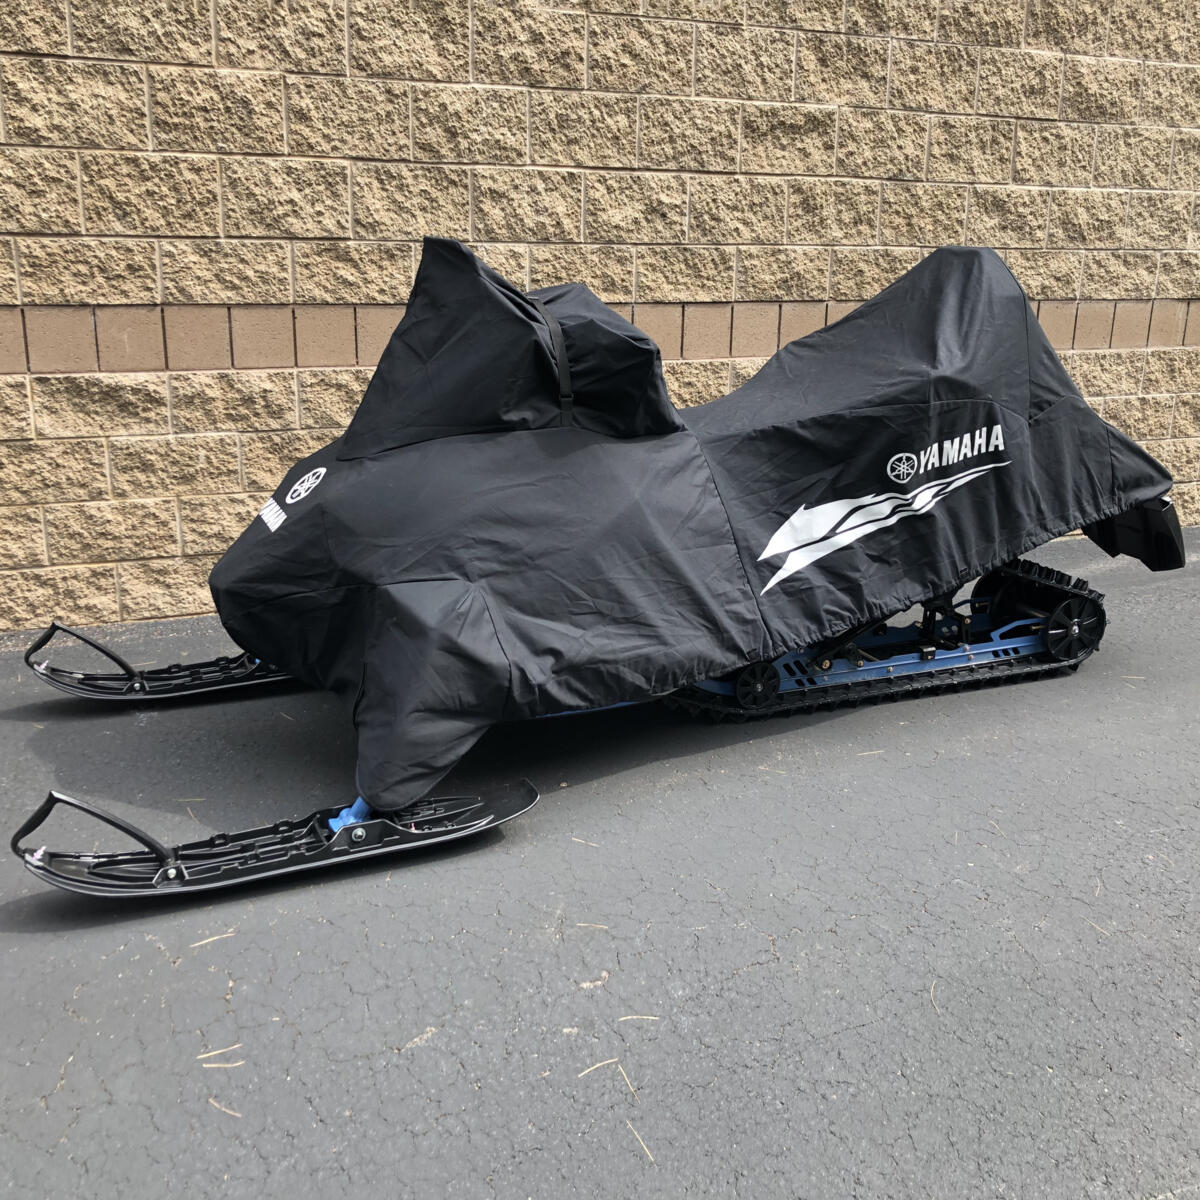 The cover protects your unit from the elements during trailering or storage. Back-coated with urethane, it provides an excellent barrier to the elements and road grime.